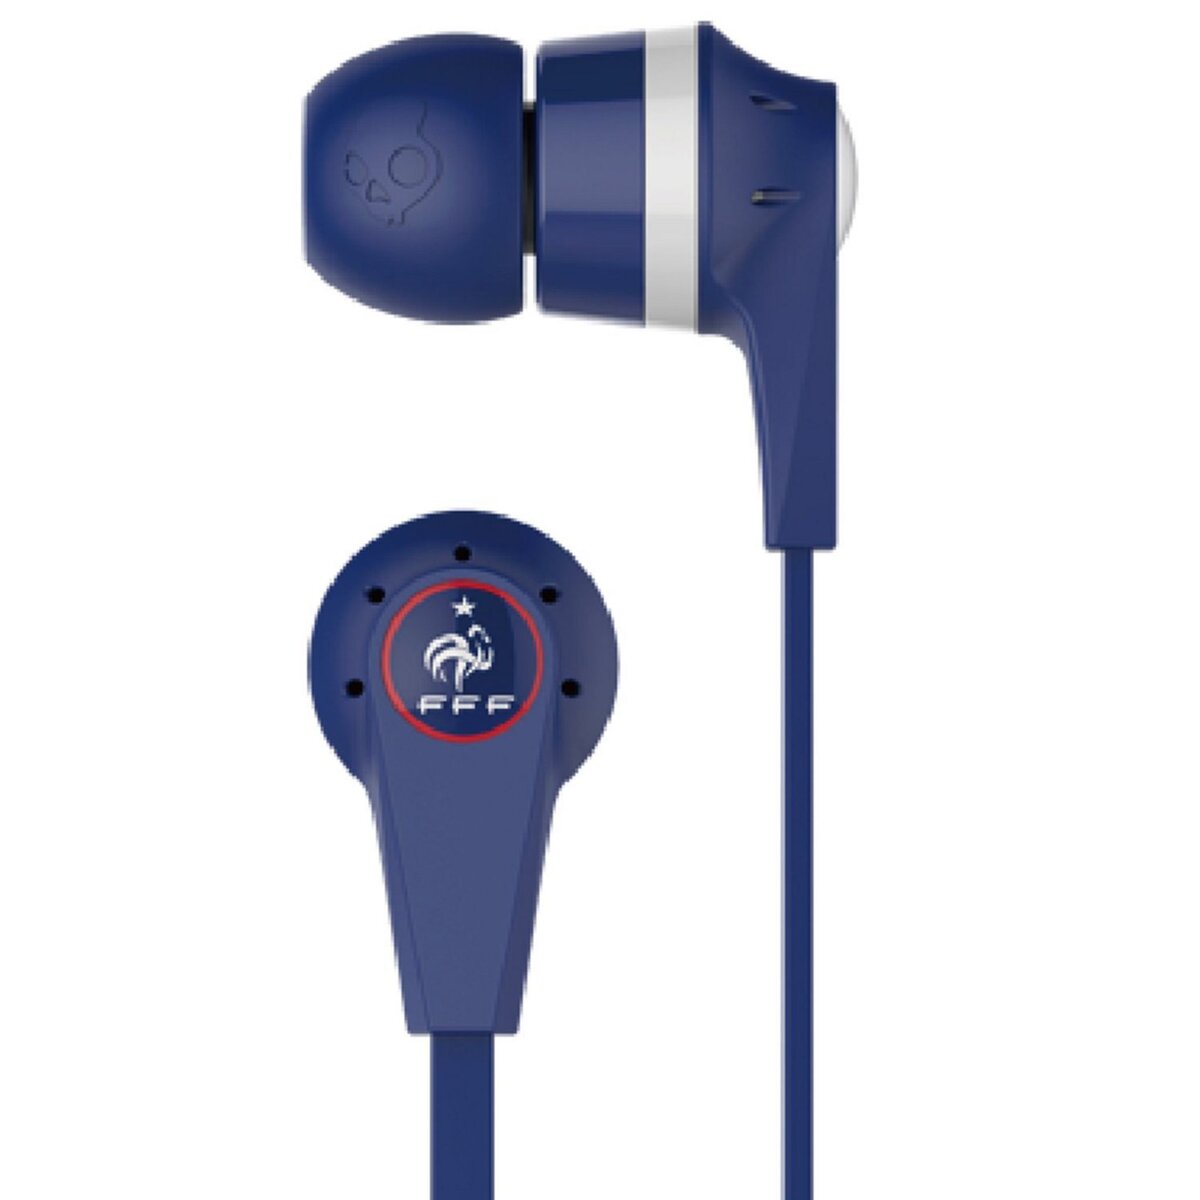 SKULLCANDY Ecouteurs intra-auriculaires Skullcandy F.F.F